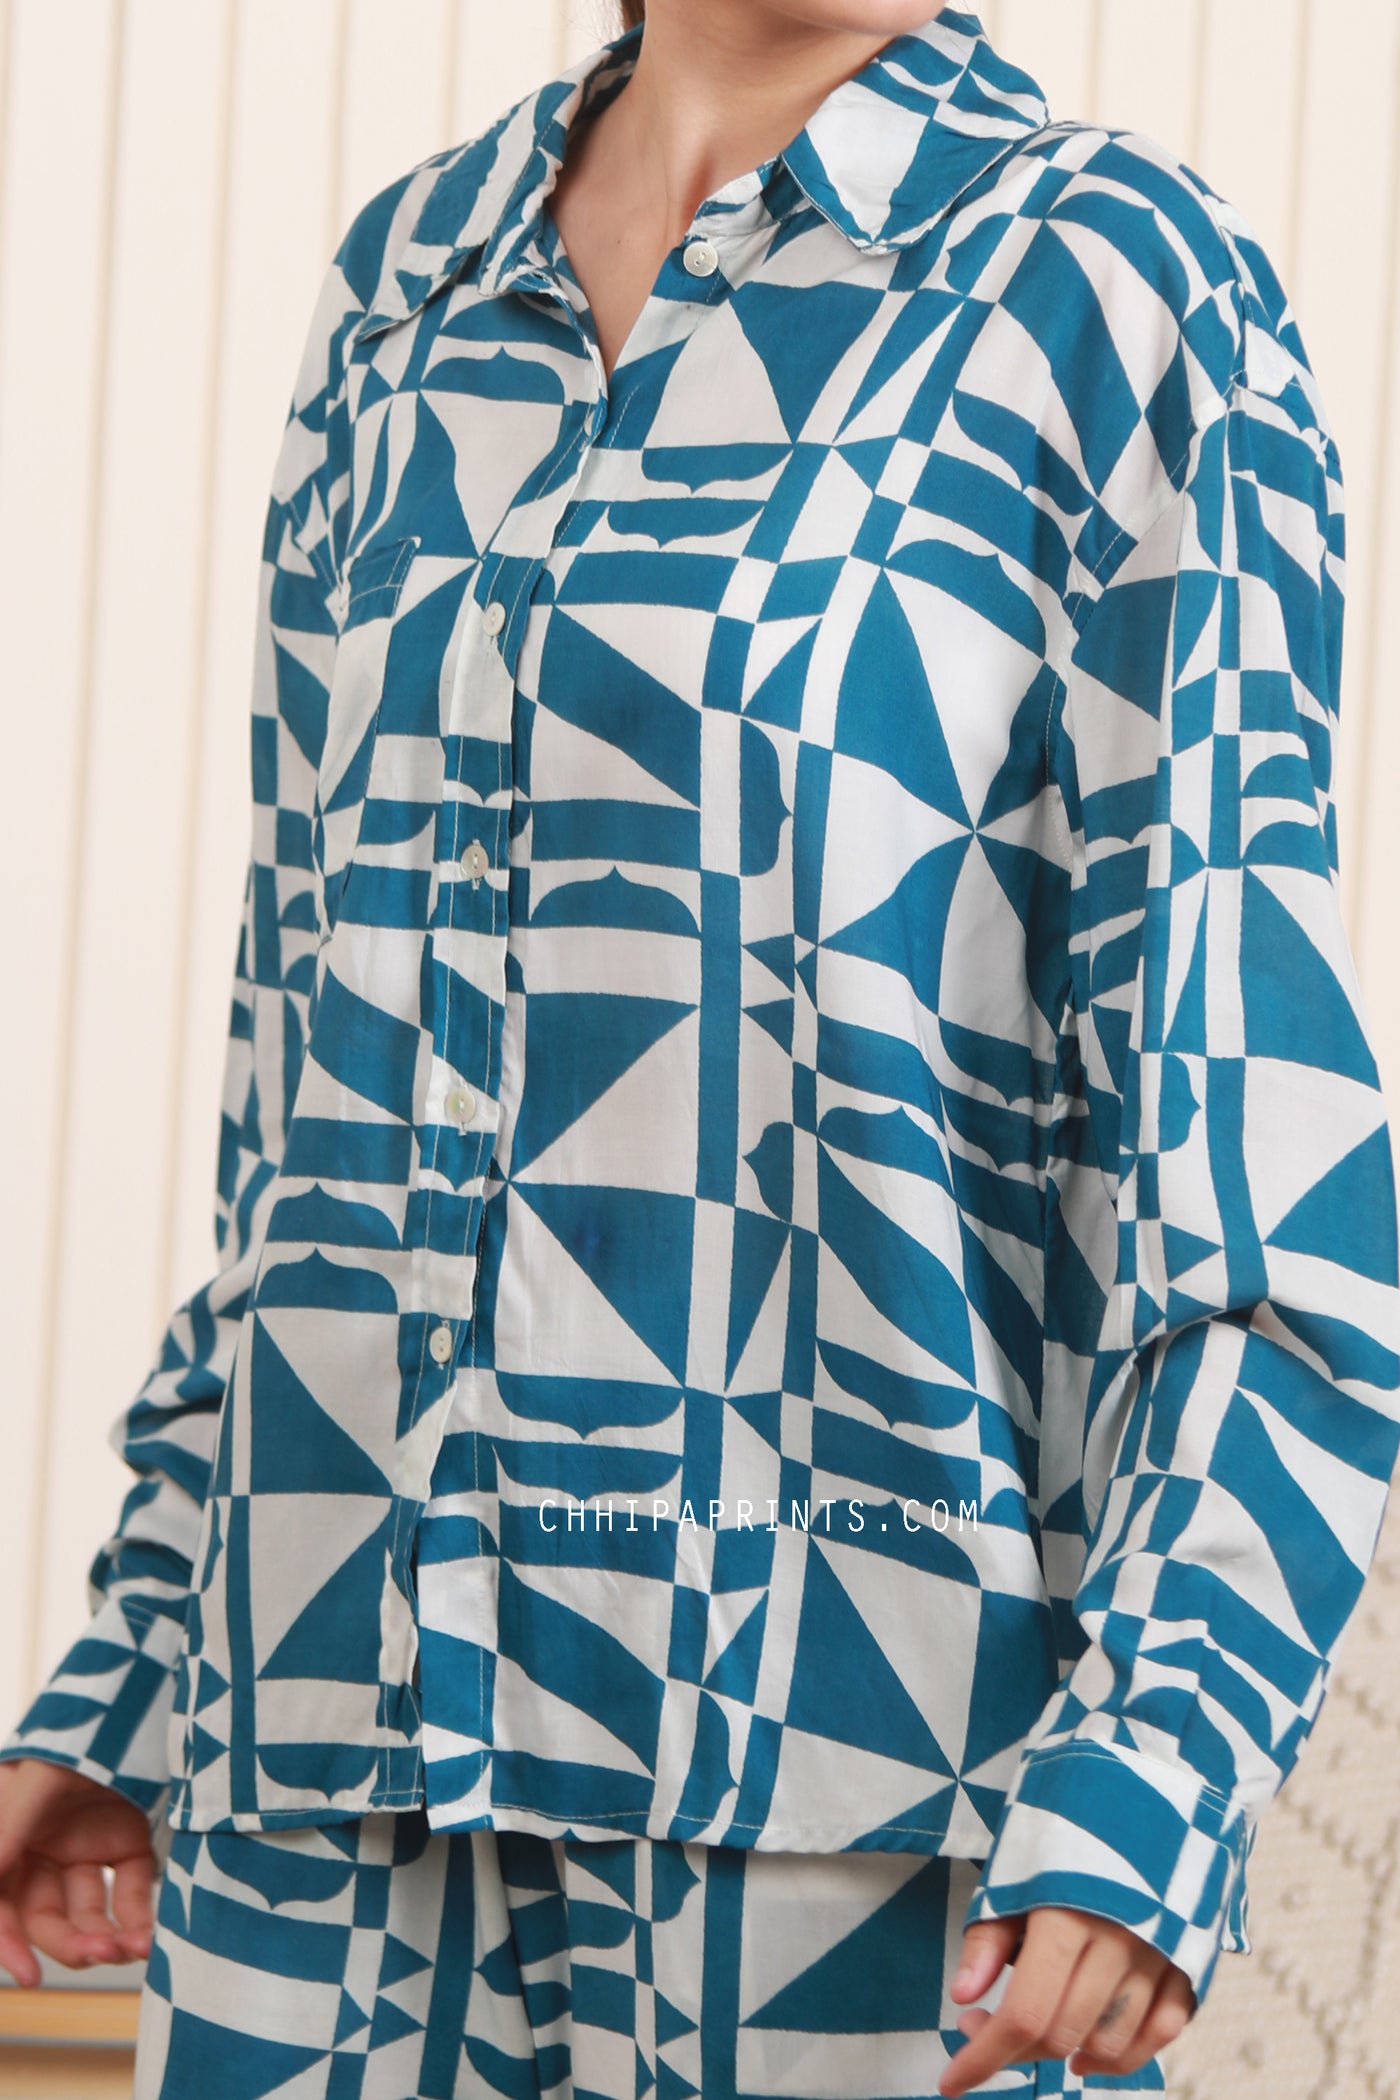 Cotton Modal Abstract Print Co Ord Set in Teal Blue